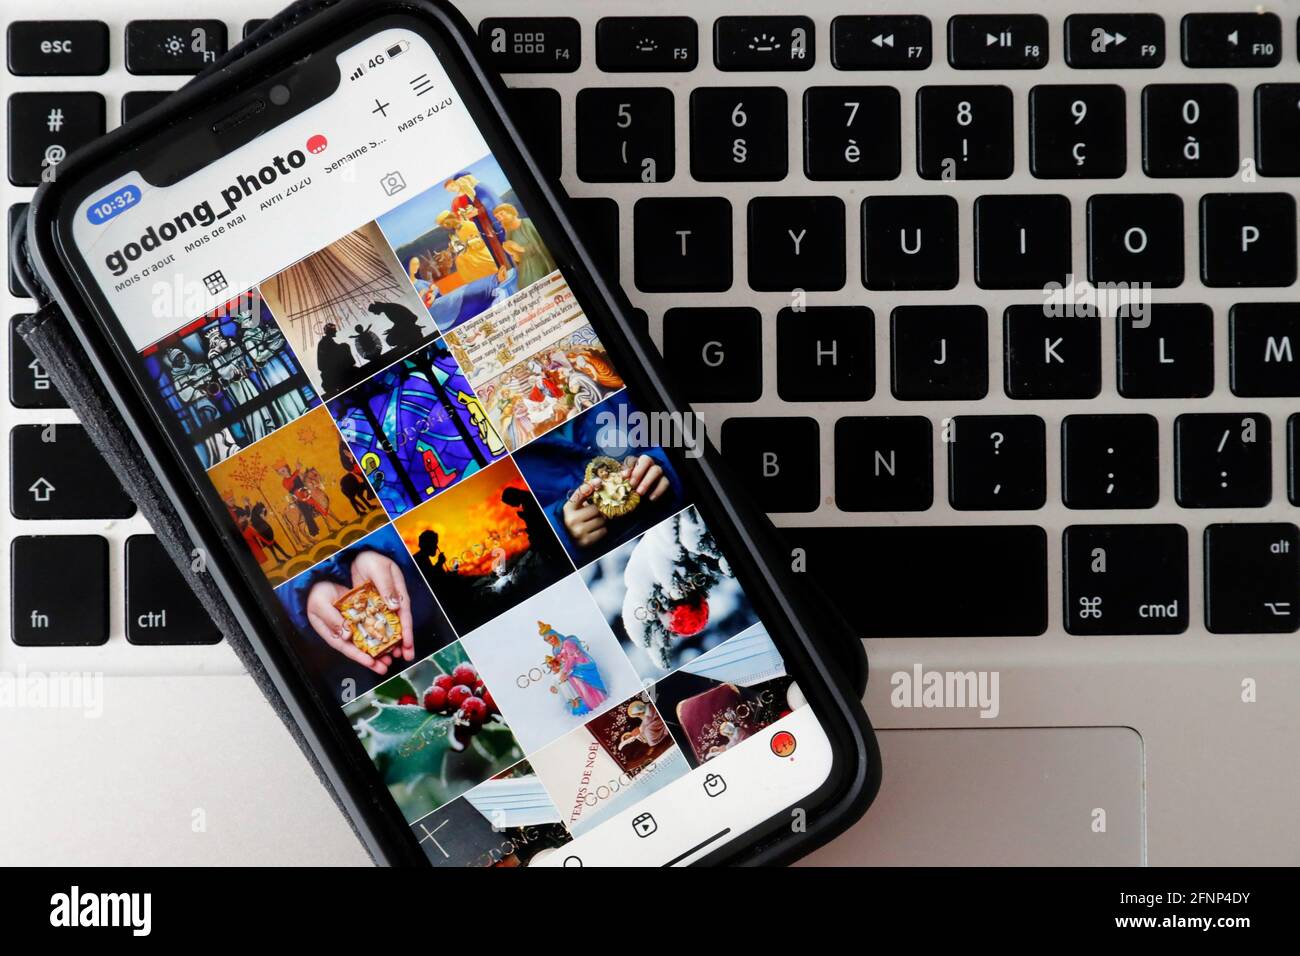 Iphone on a laptop  keyboard showing the explore page of the Instagram app with catholic images.  France. Stock Photo